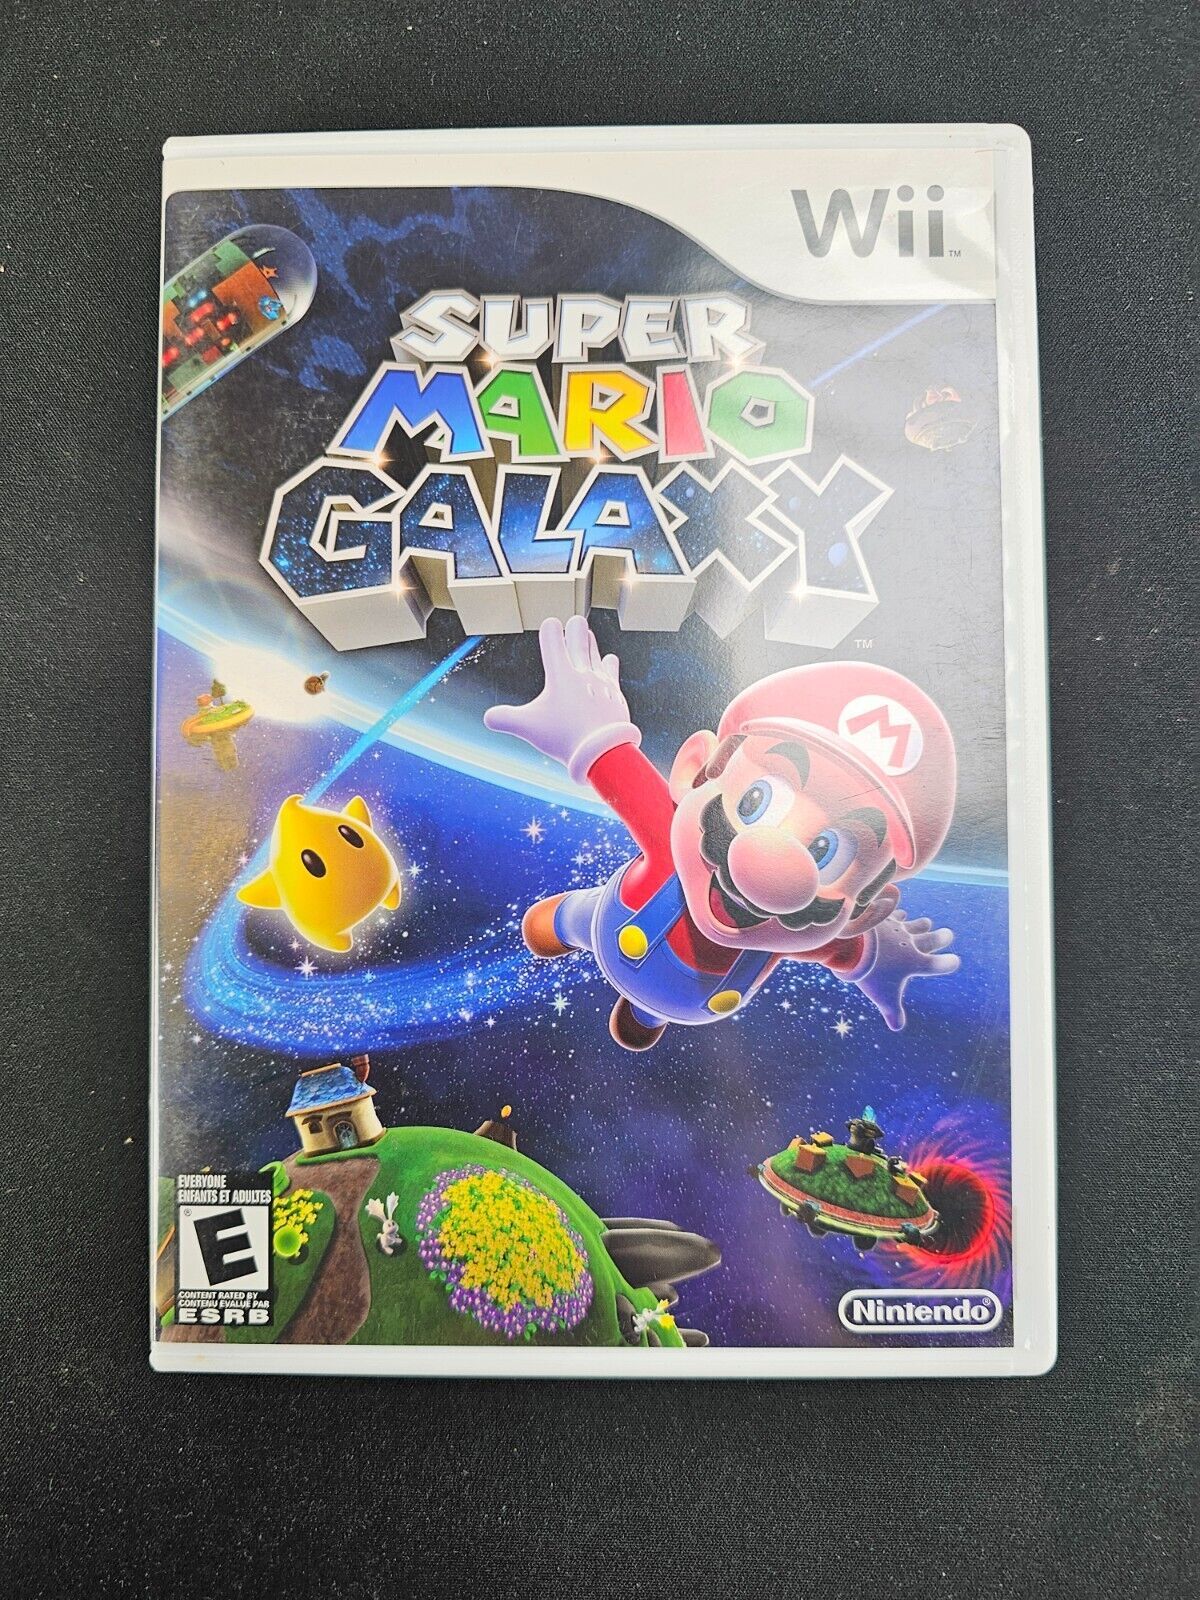 Super Mario Galaxy Nintendo Wii, 2007 Video Game With Complete Manual - $11.83